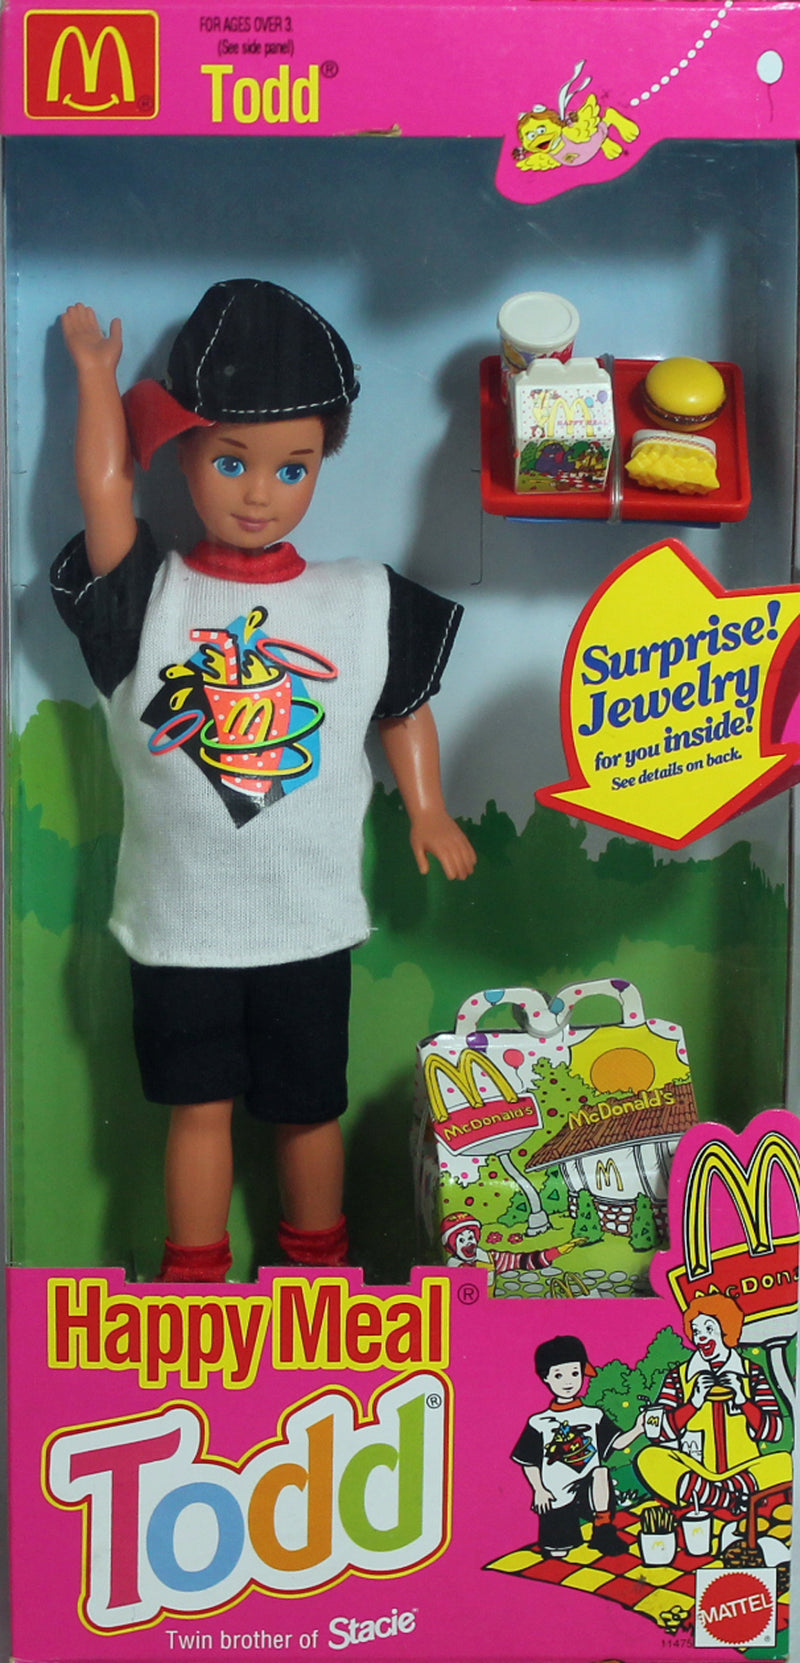 1993 Happy Meal Todd Barbie (11475)